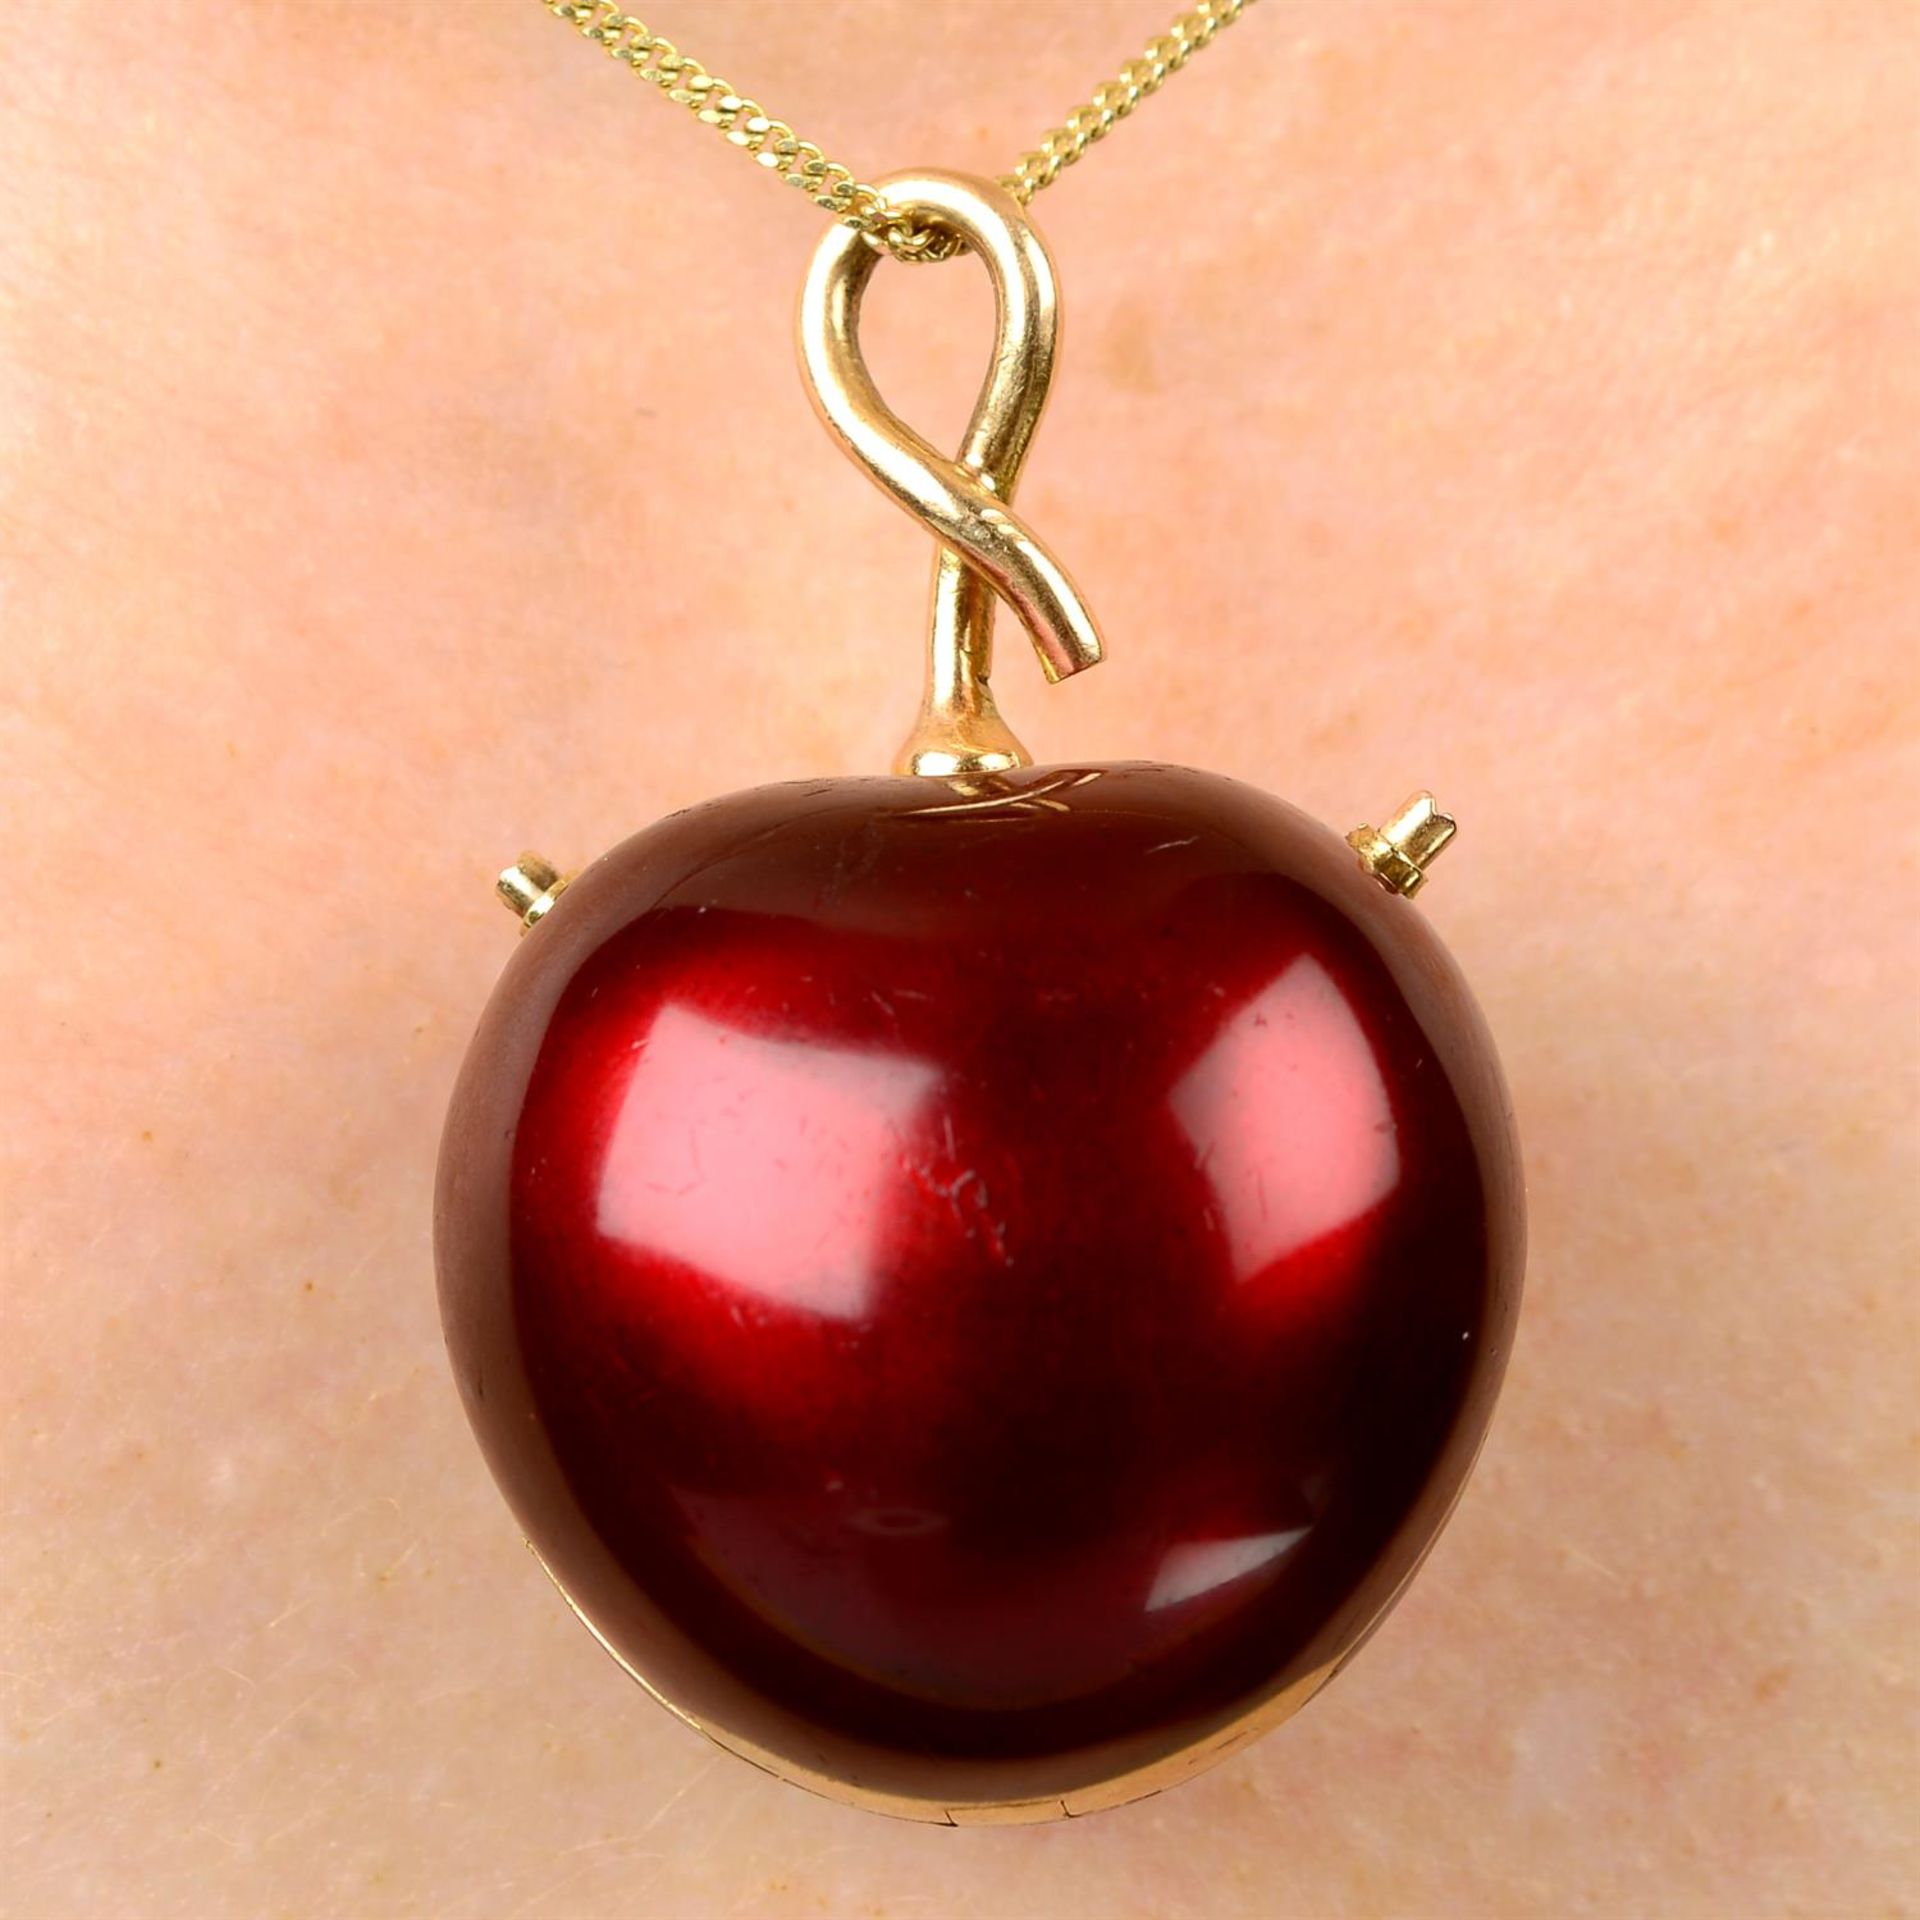 A mid 20th century gold and red enamel cherry fob watch.